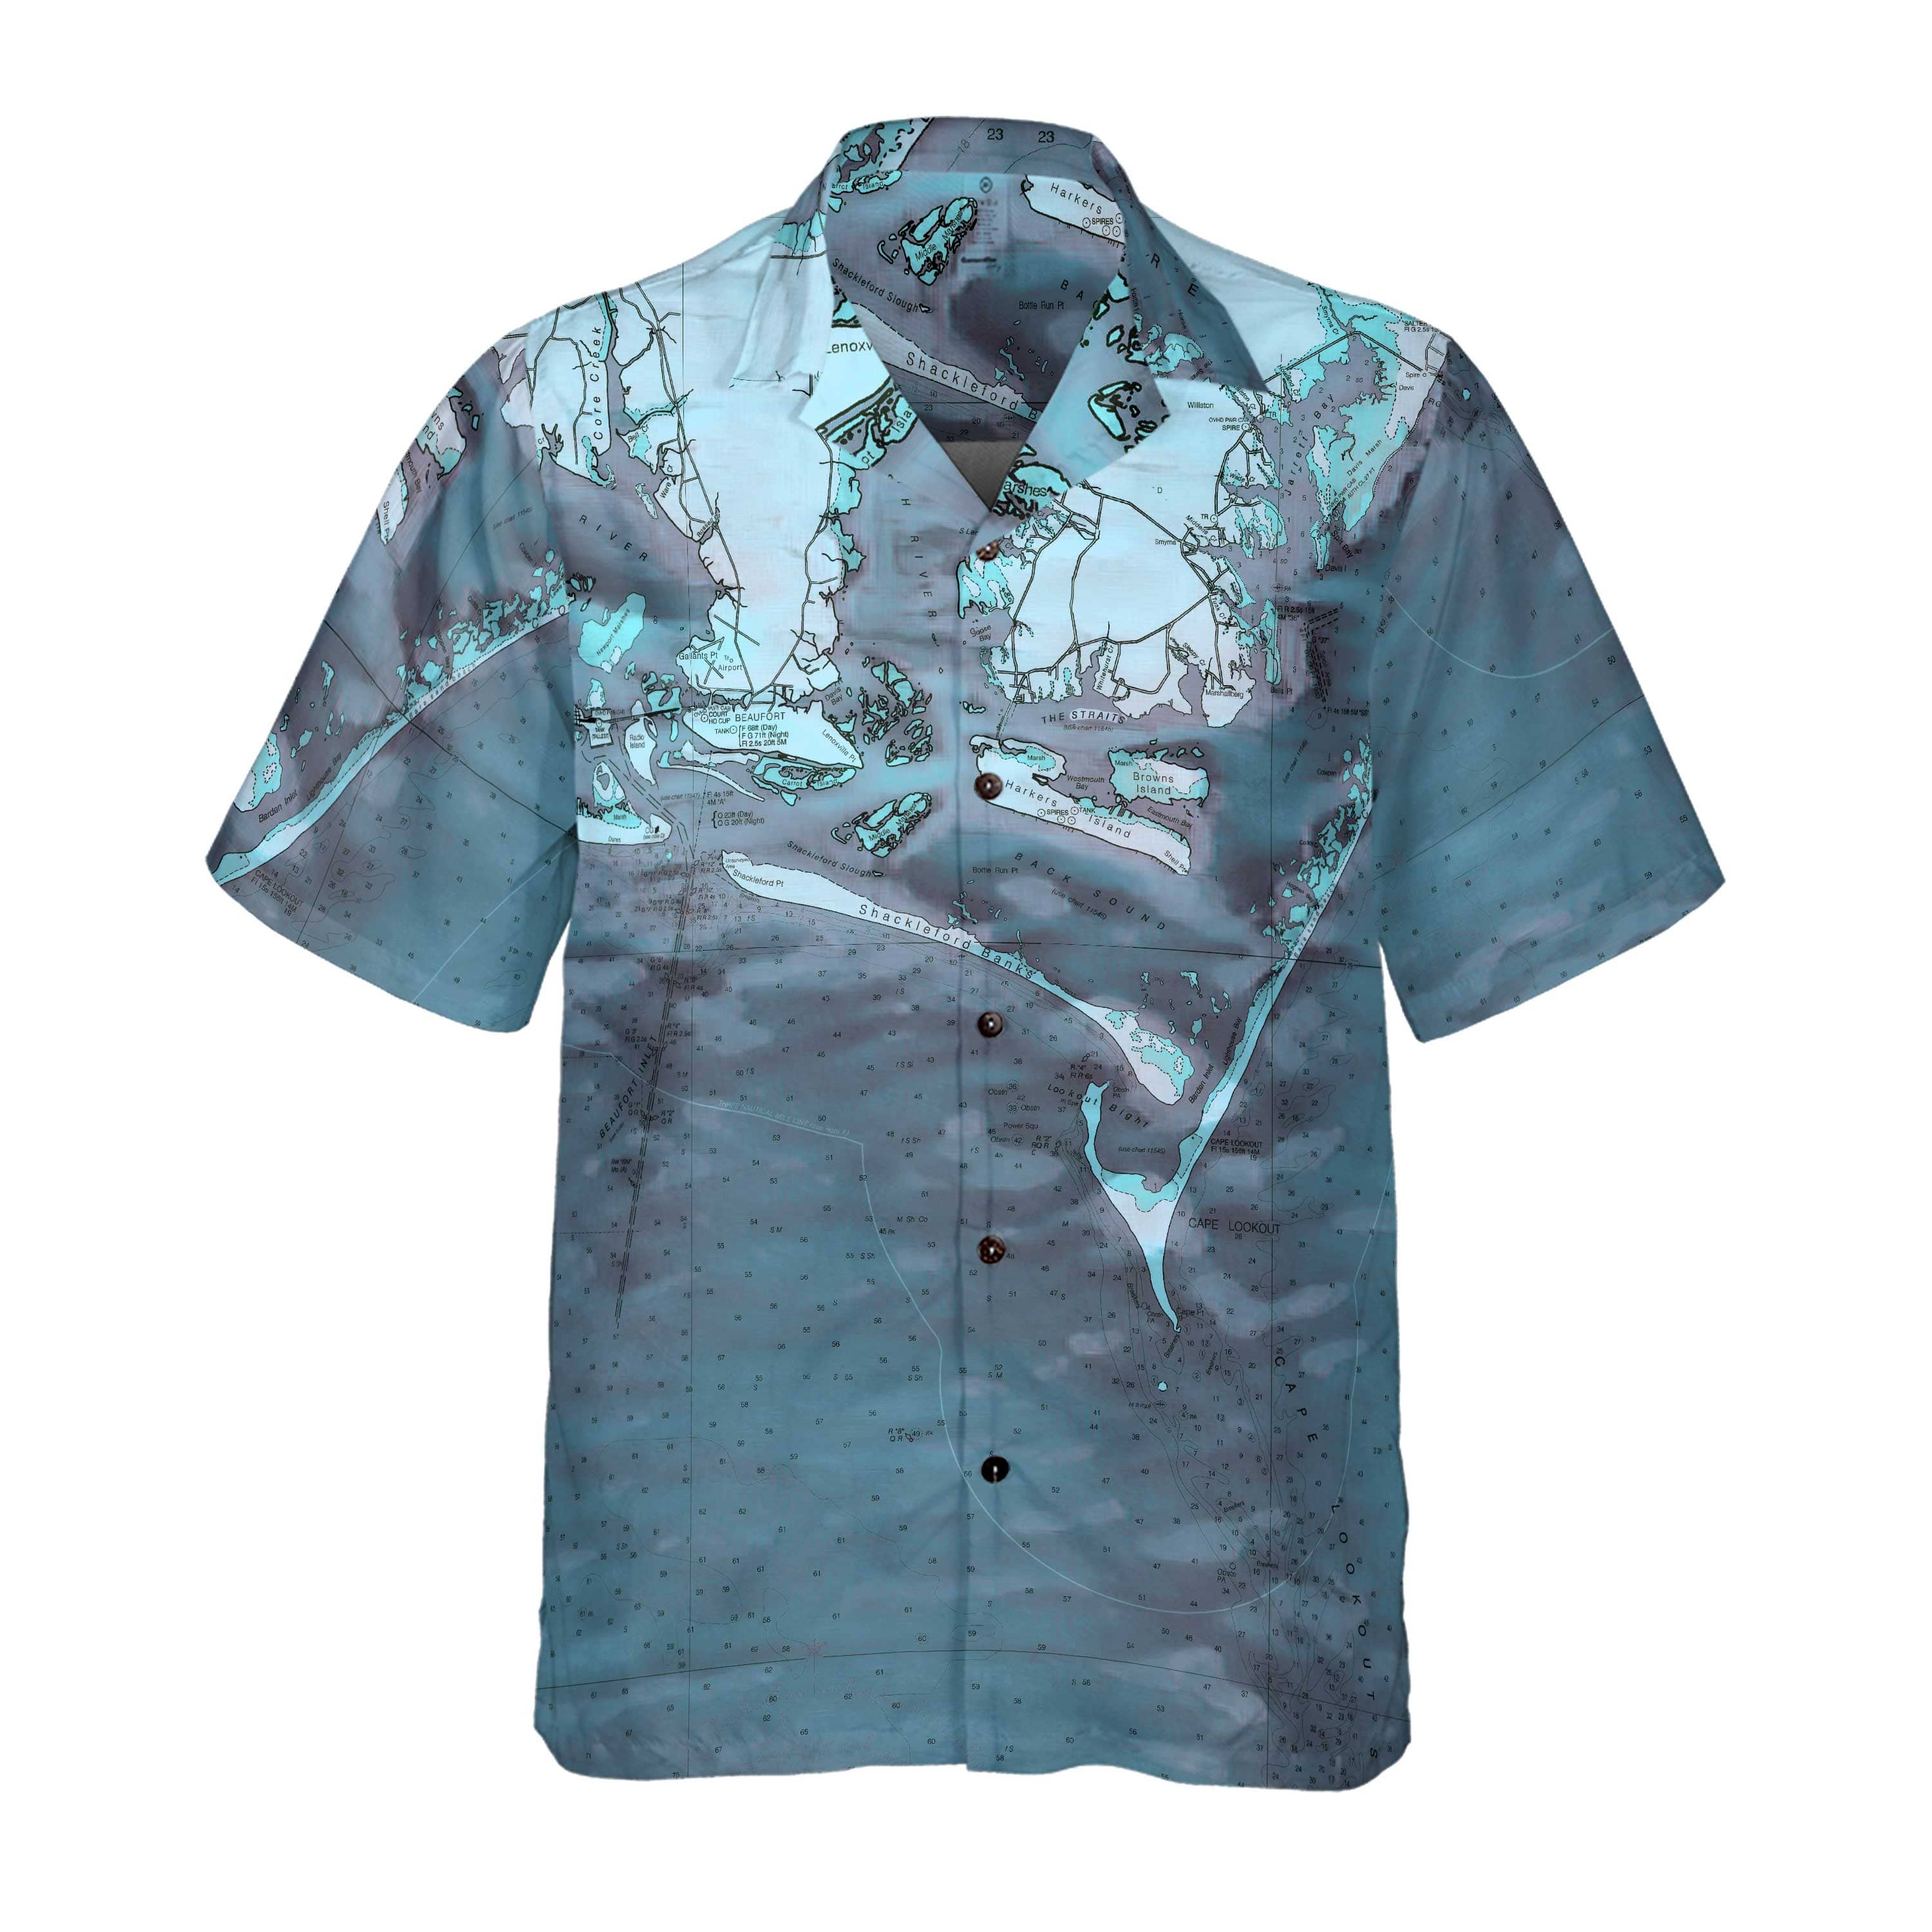 The Seafoam Green Cape Lookout and Beaufort NC Coconut Button Camp Shirt